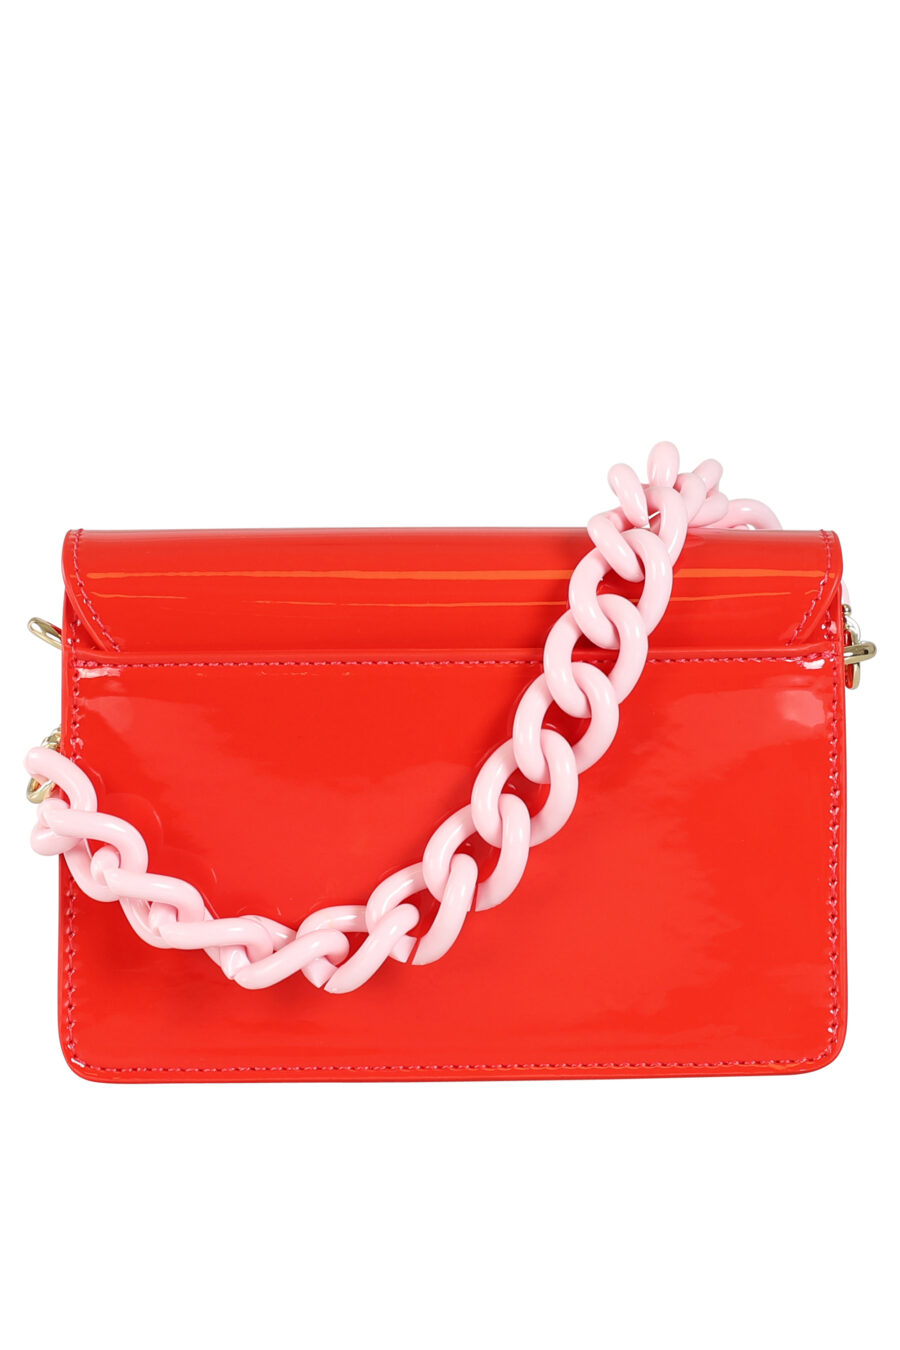 Red shoulder bag with logo and chain - 8052019146684 3